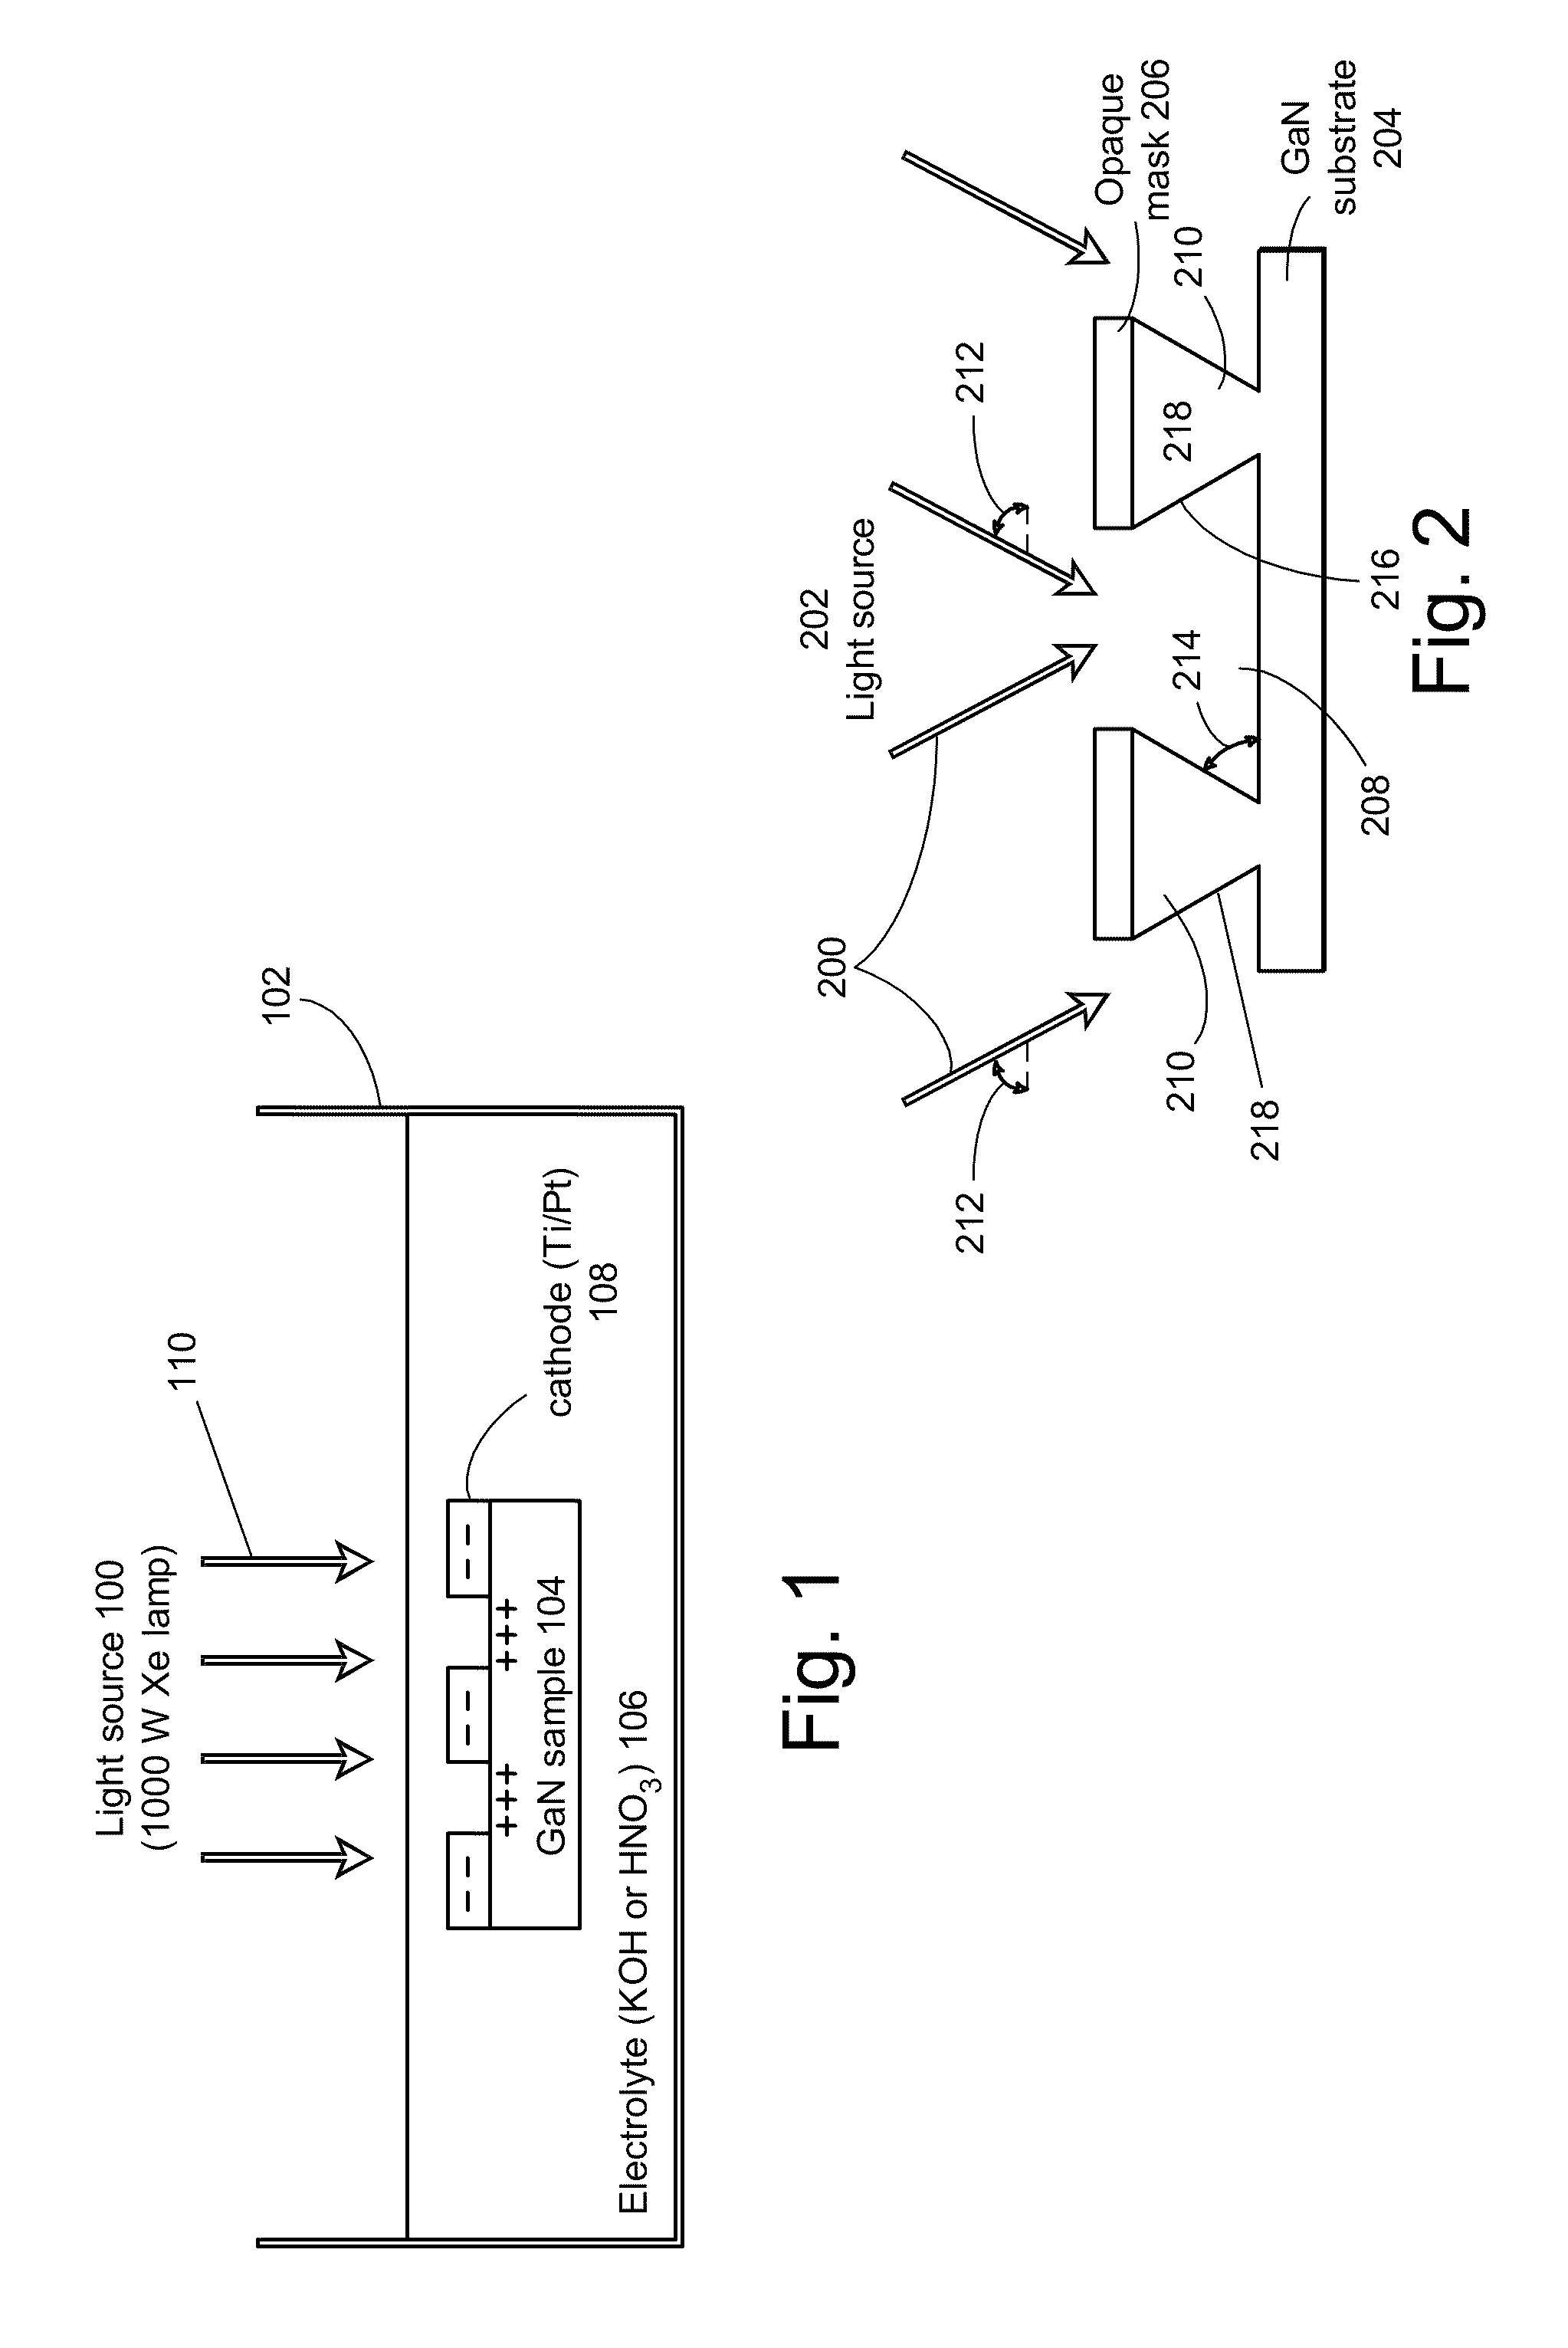 Photoelectrochemical etching for chip shaping of light emitting diodes